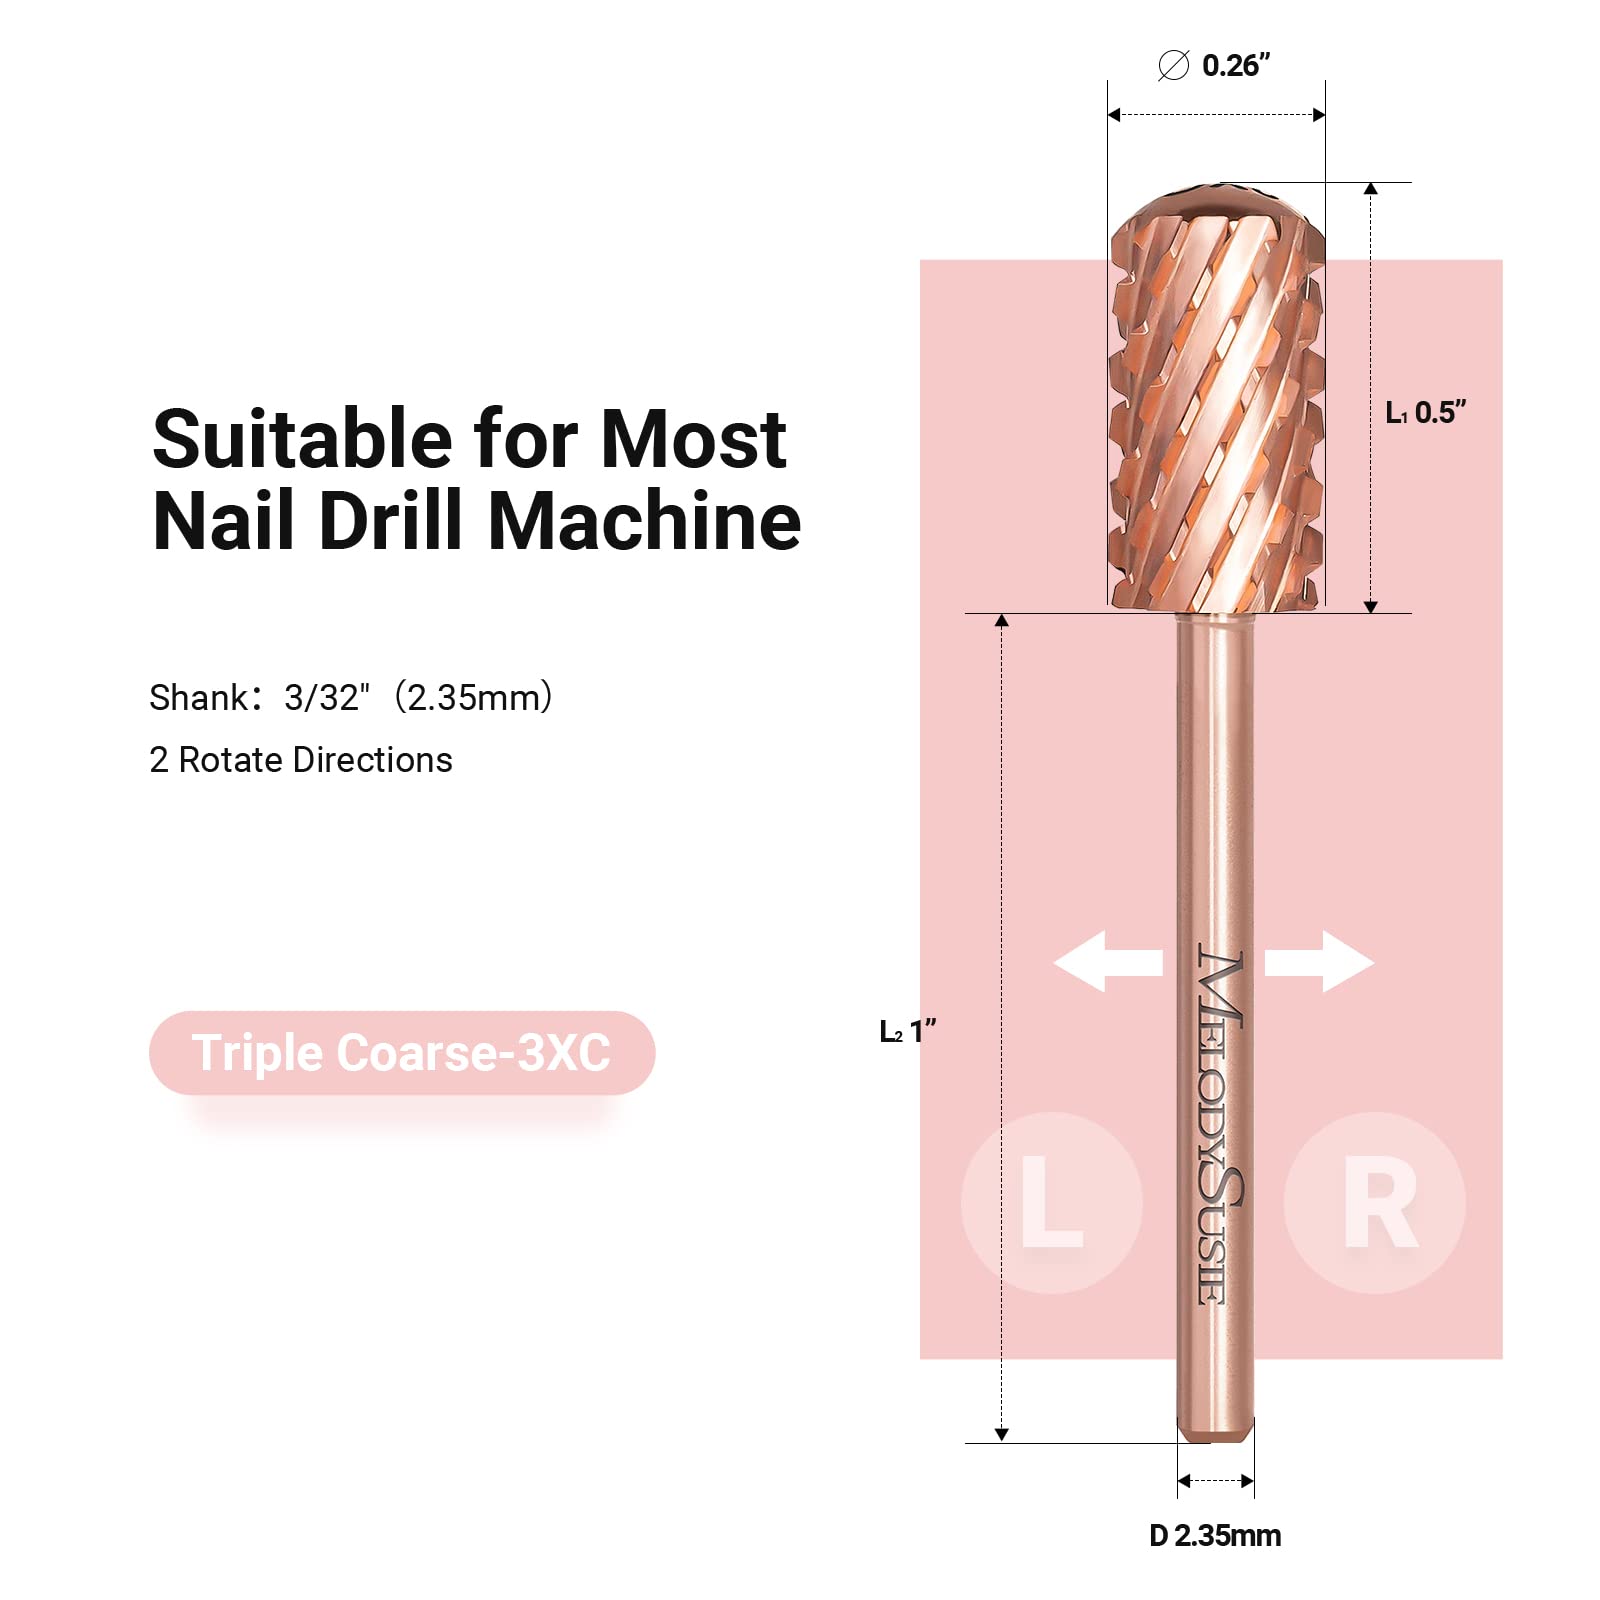 Large Barrel Smooth Top Tungsten Carbide Nail Drill Bits